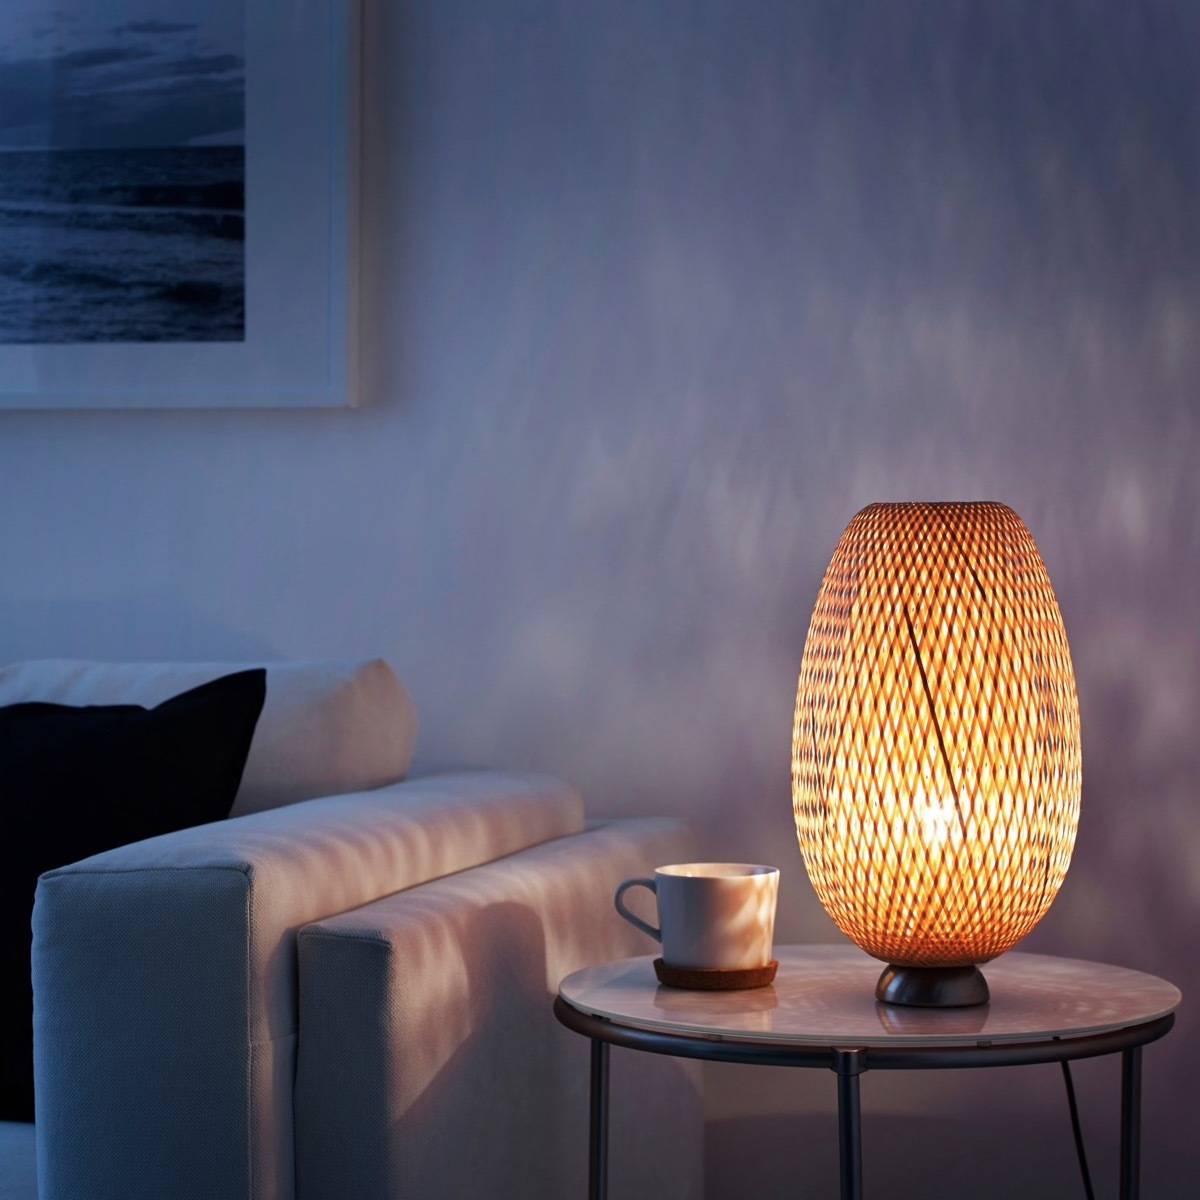 Affordable furniture and home decor pieces under $100 - IKEA table lamp